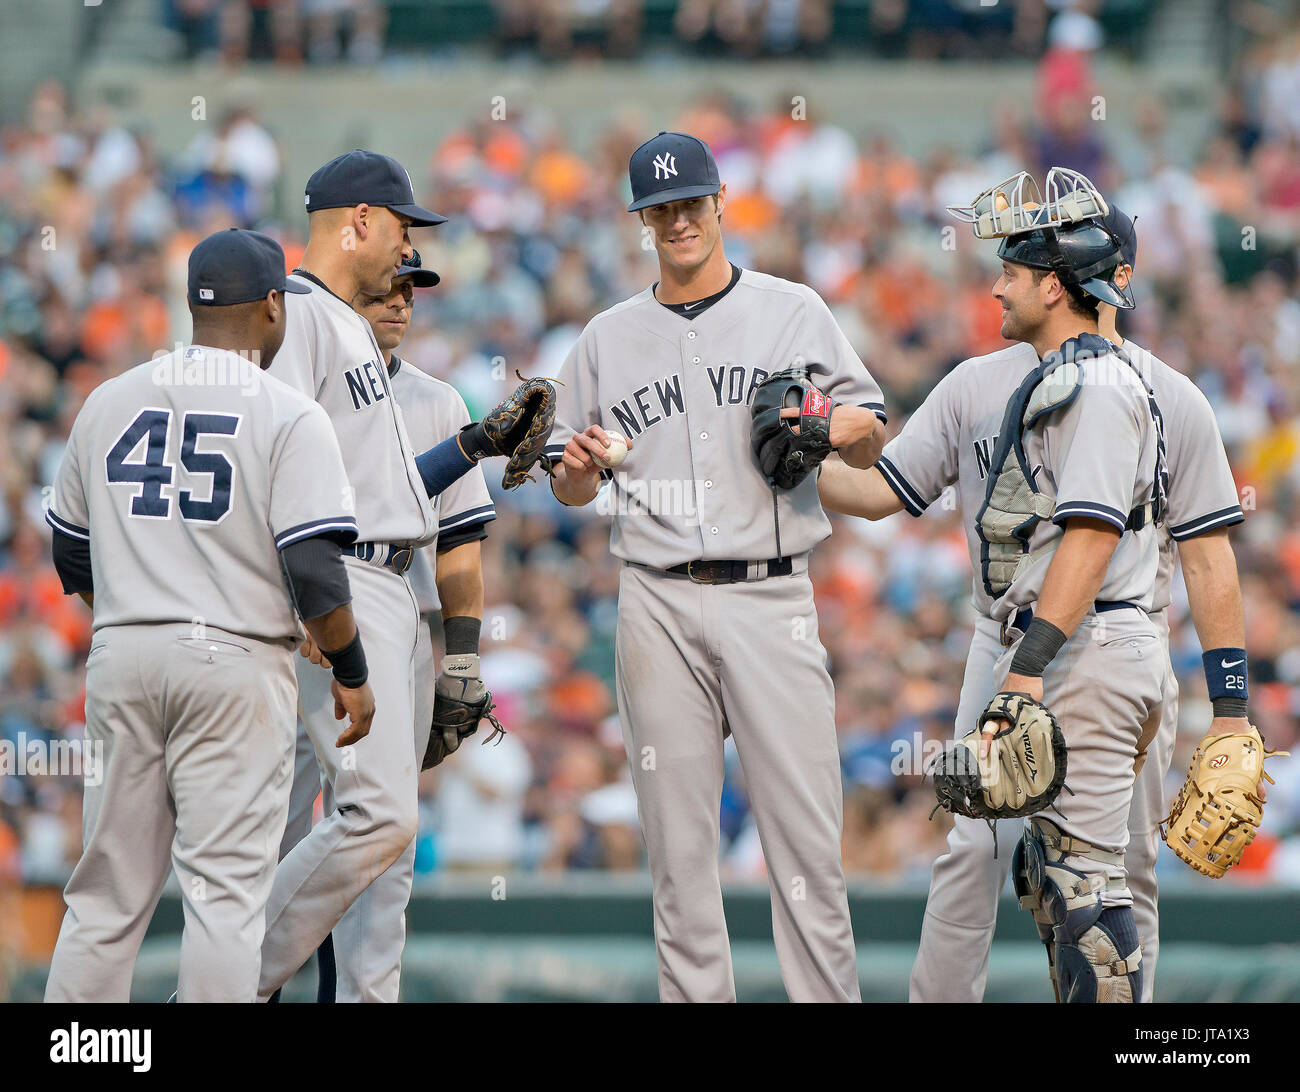 New York Yankees pitcher  Shane Greene (61), center, is congratulated by his teammates after he faced his last batter in the eighth inning against the Baltimore Orioles at Oriole Park at Camden Yards in Baltimore, MD on July 12, 2014. Greene retired Oriole pinch-hitter Steve Clevenger to secure the first out in the eighth before he was replaced.  The Yankees won the game 3 - 0.  From left to right: third baseman Zelous Wheeler (45), shortstop Derek Jeter (2), second baseman Brian Roberts (14), Greene, catcher Francisco Cervelli (29), and first baseman Mark Teixeira (25). Credit: Ron Sachs / CN Stock Photo